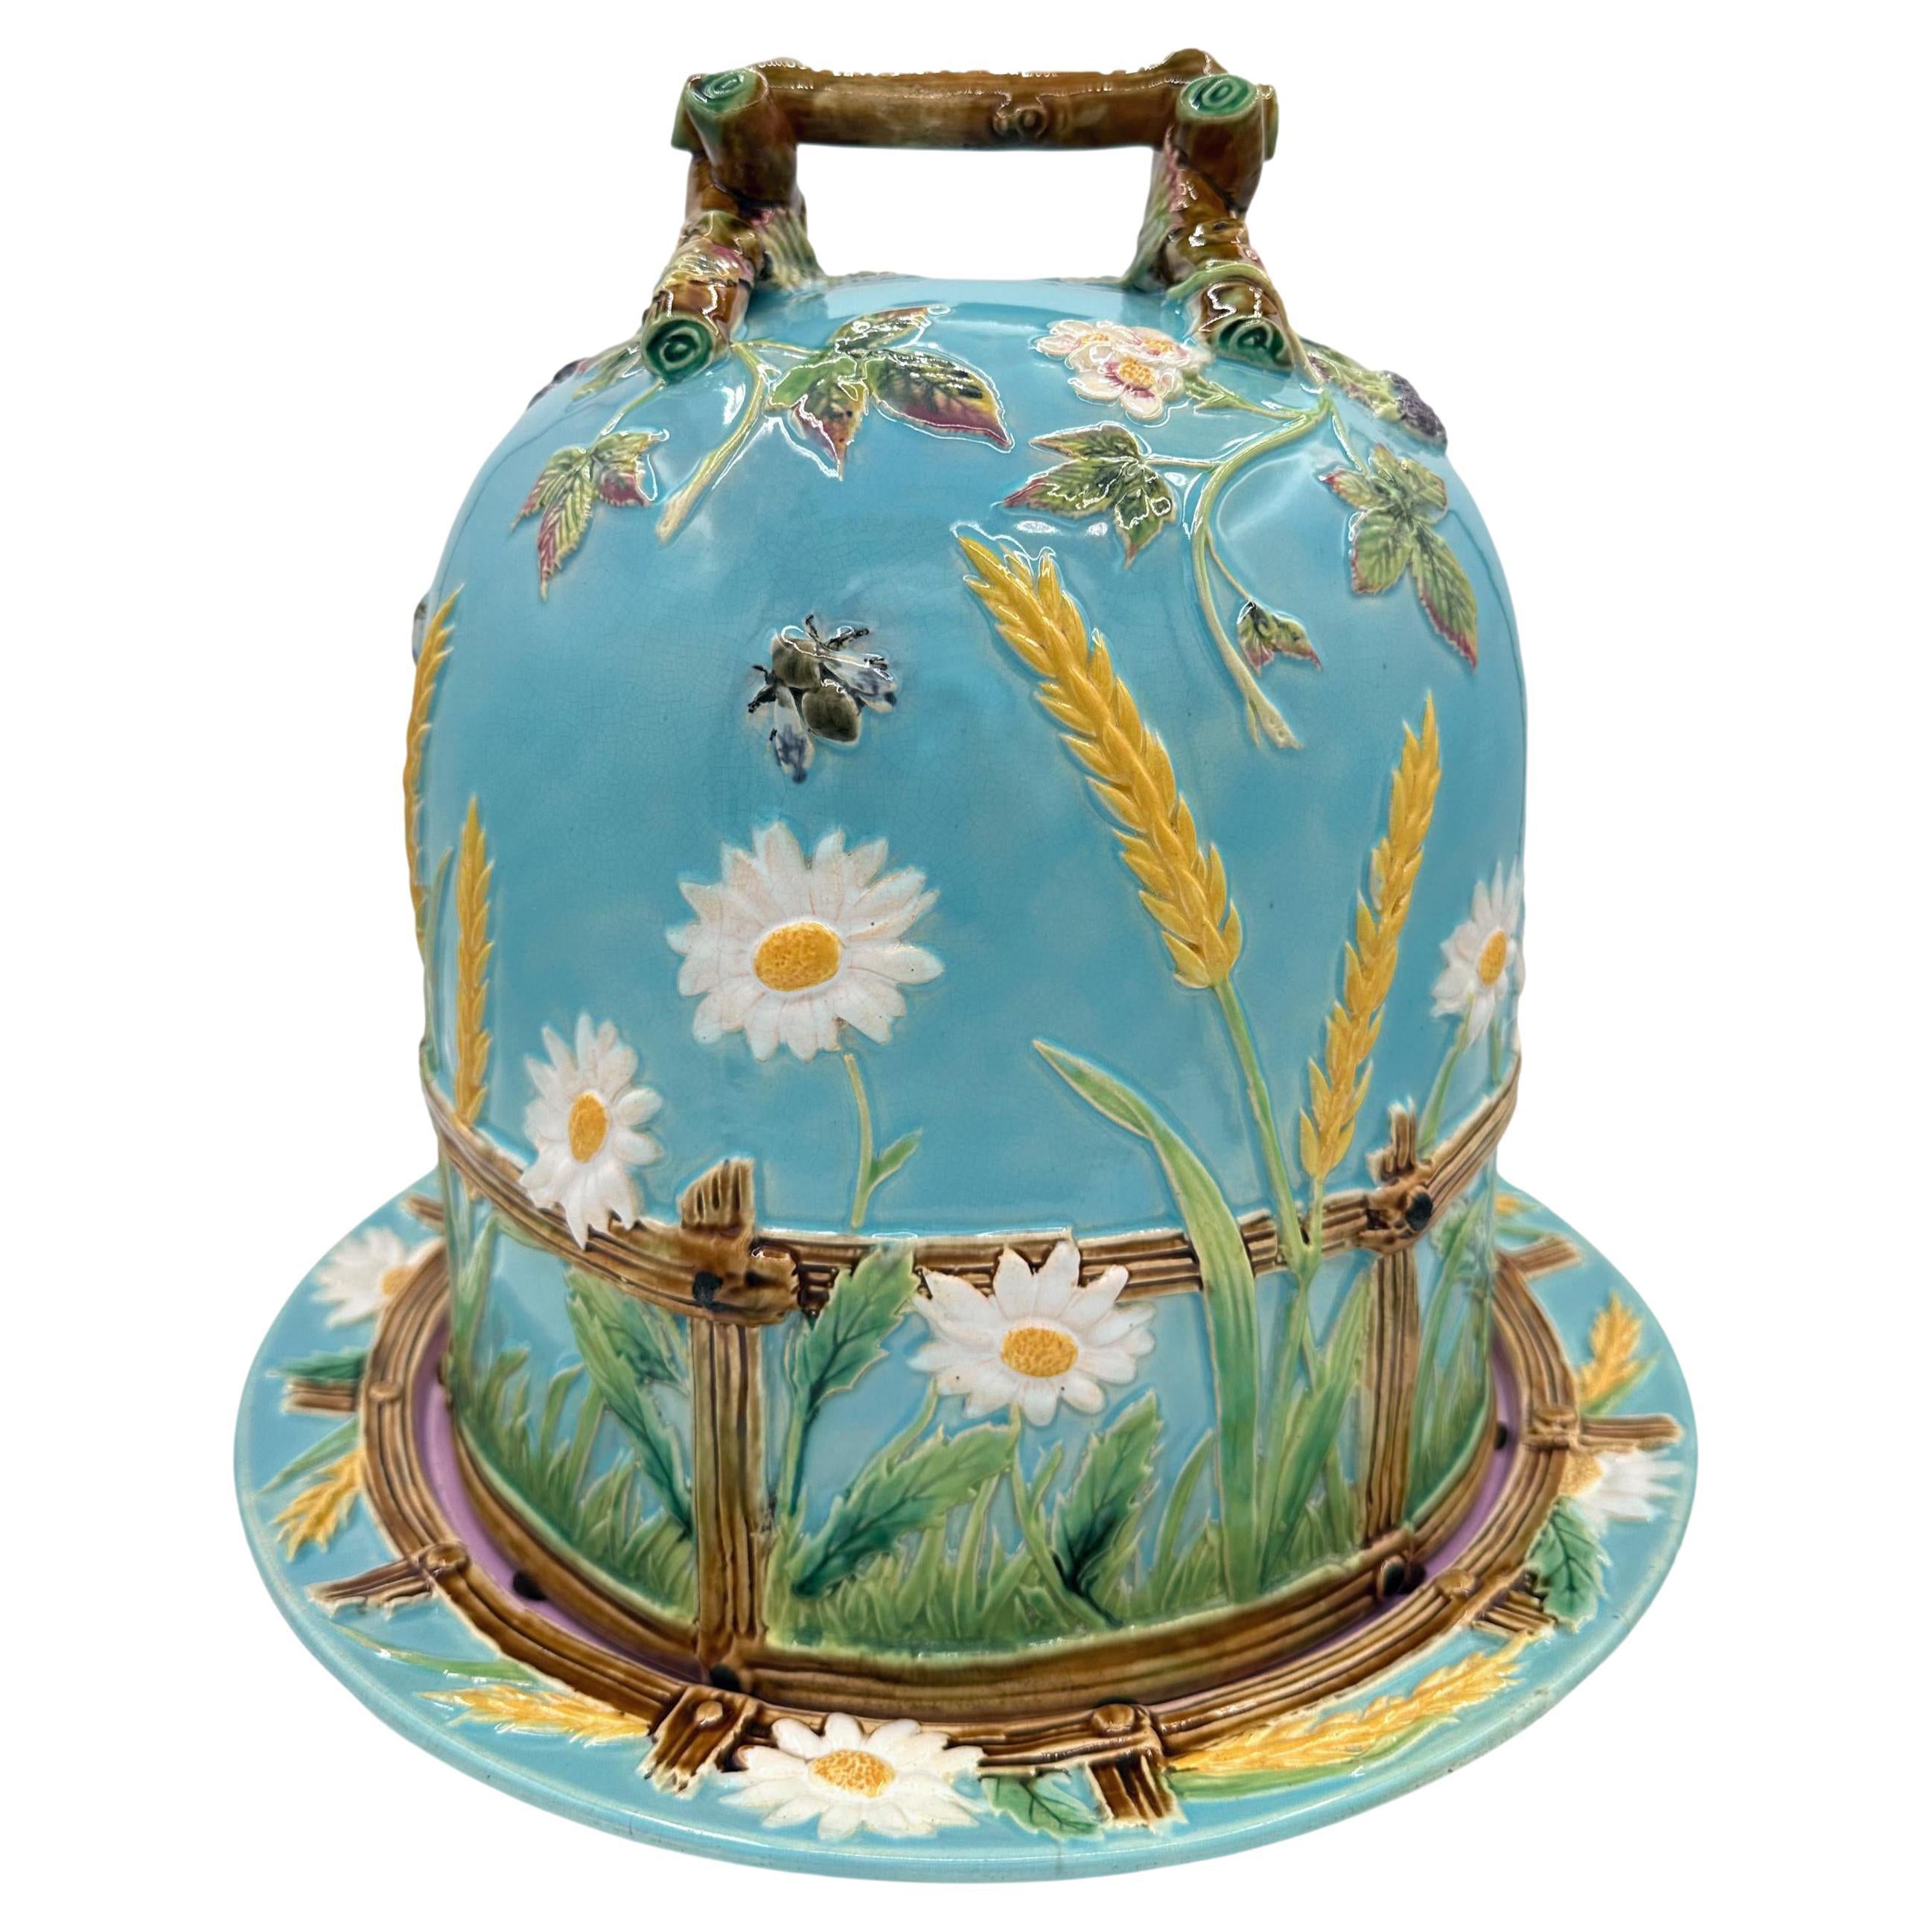 A Large George Jones Majolica Cheese Bell with Daisys, Bees and Fence, ca. 1878 For Sale